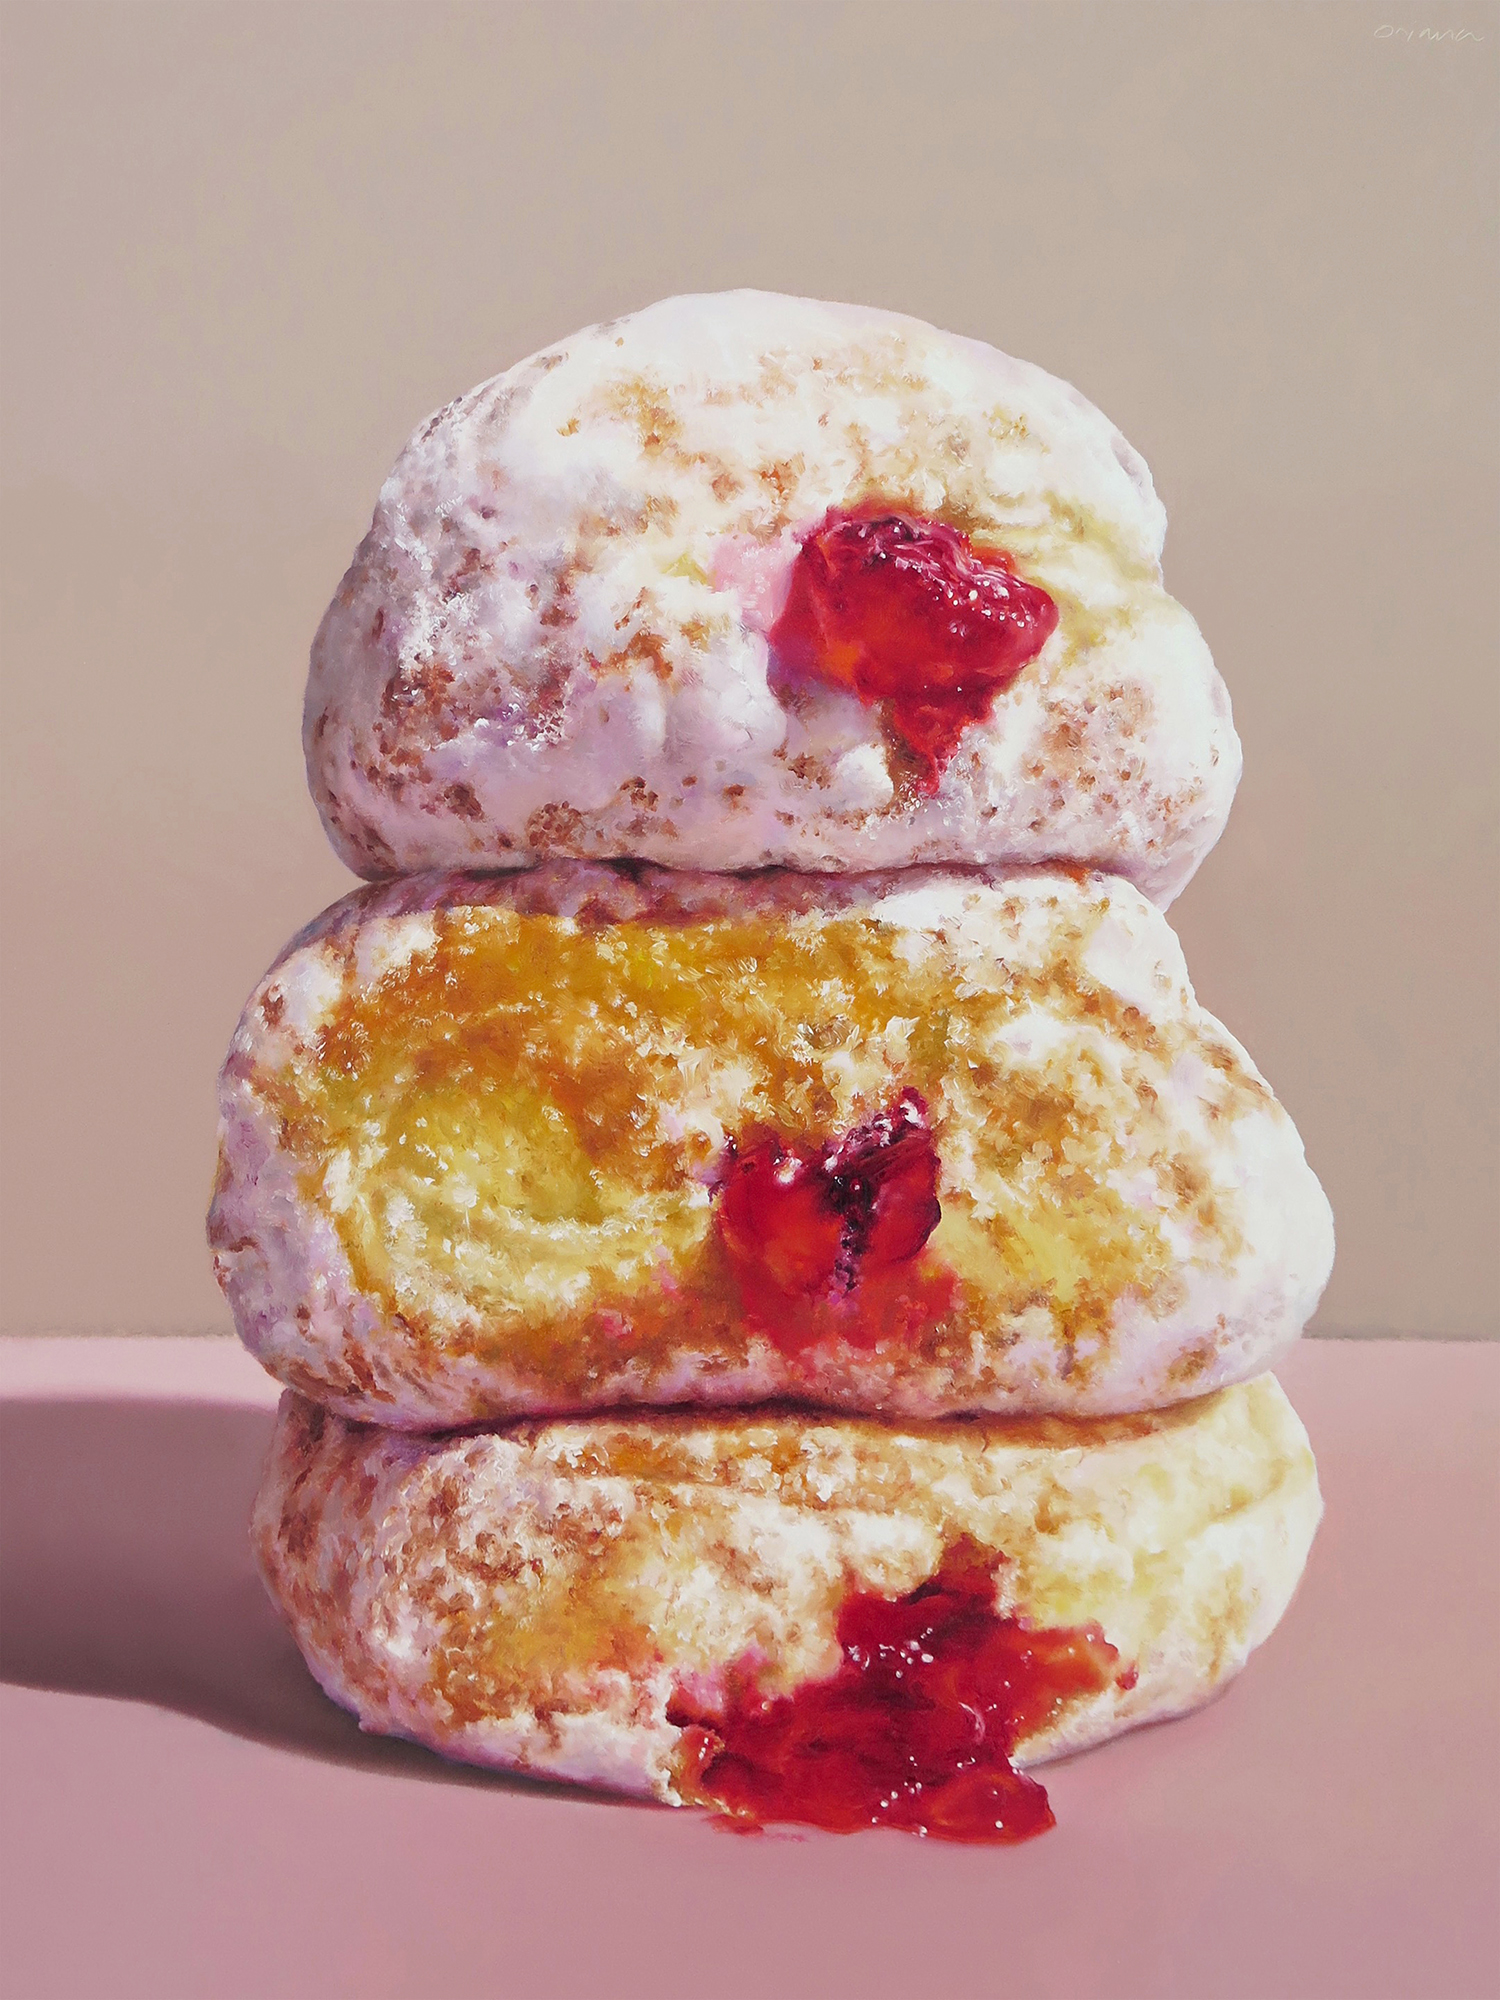  Powdered Jelly Doughnuts  oil on panel / 12 x 16 inches  SOLD 